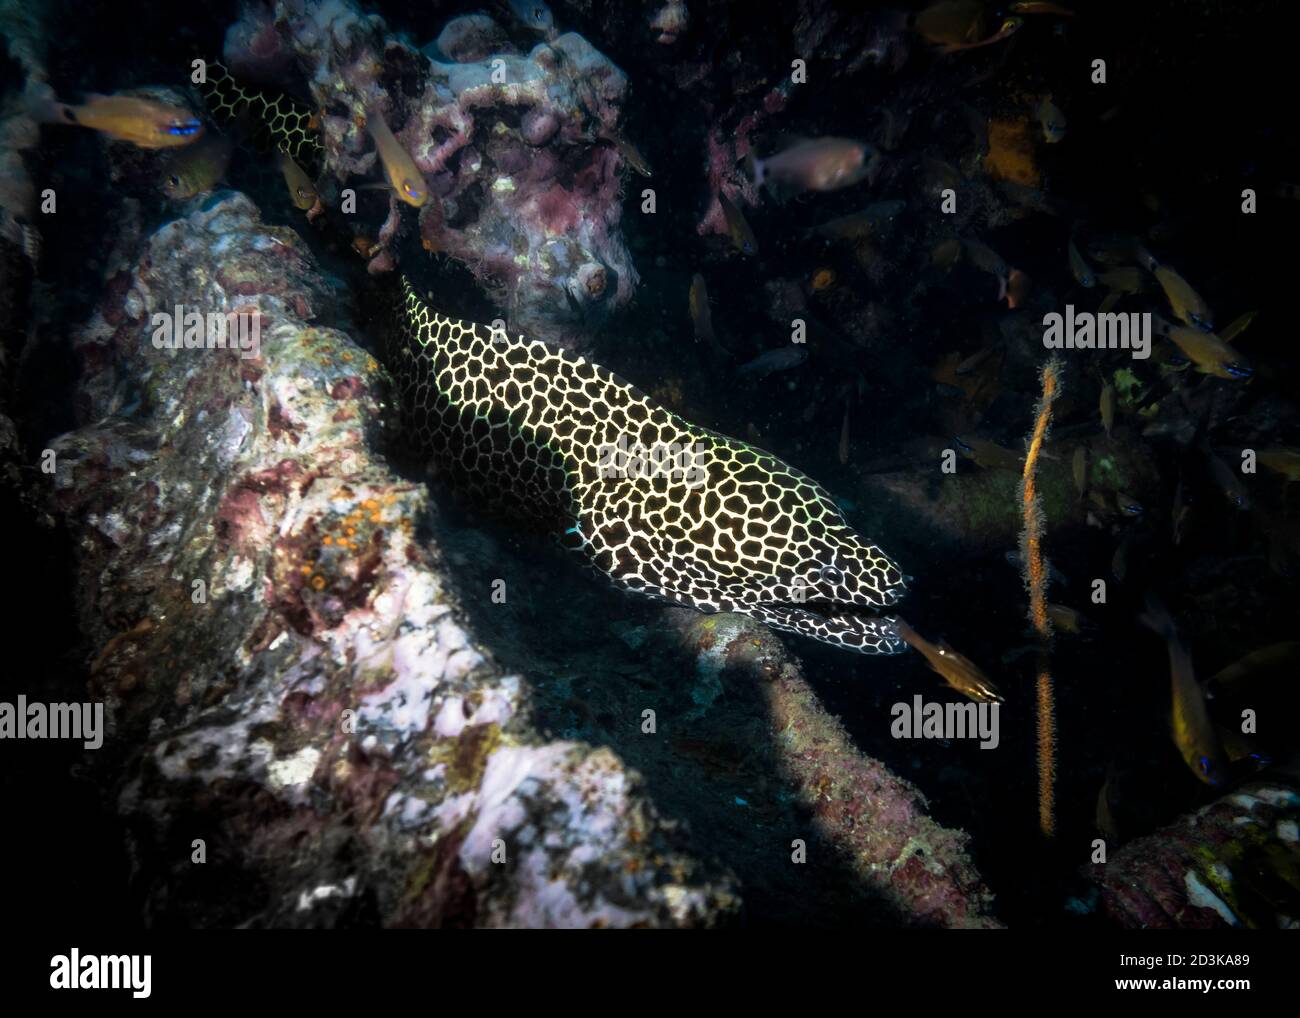 Honeycomb Moray Eel on a sunken ship at night in the Indian ocean Stock Photo